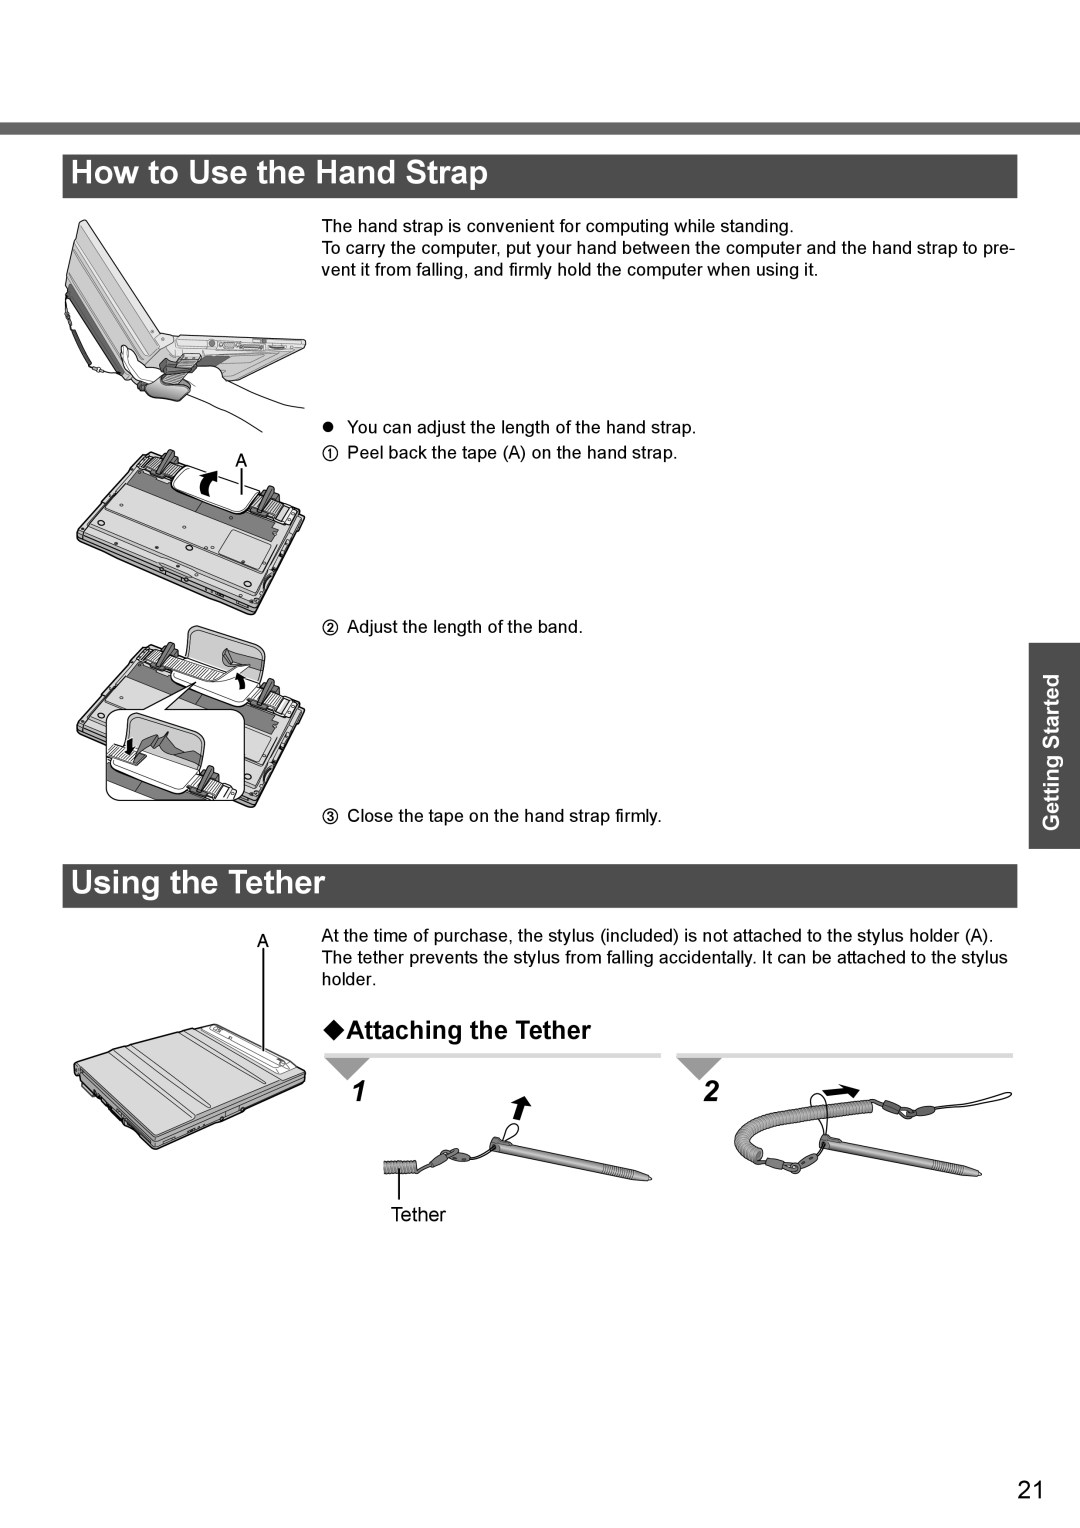 Panasonic CF-T4 operating instructions How to Use the Hand Strap, Using the Tether, ‹Attaching the Tether, Getting Started 